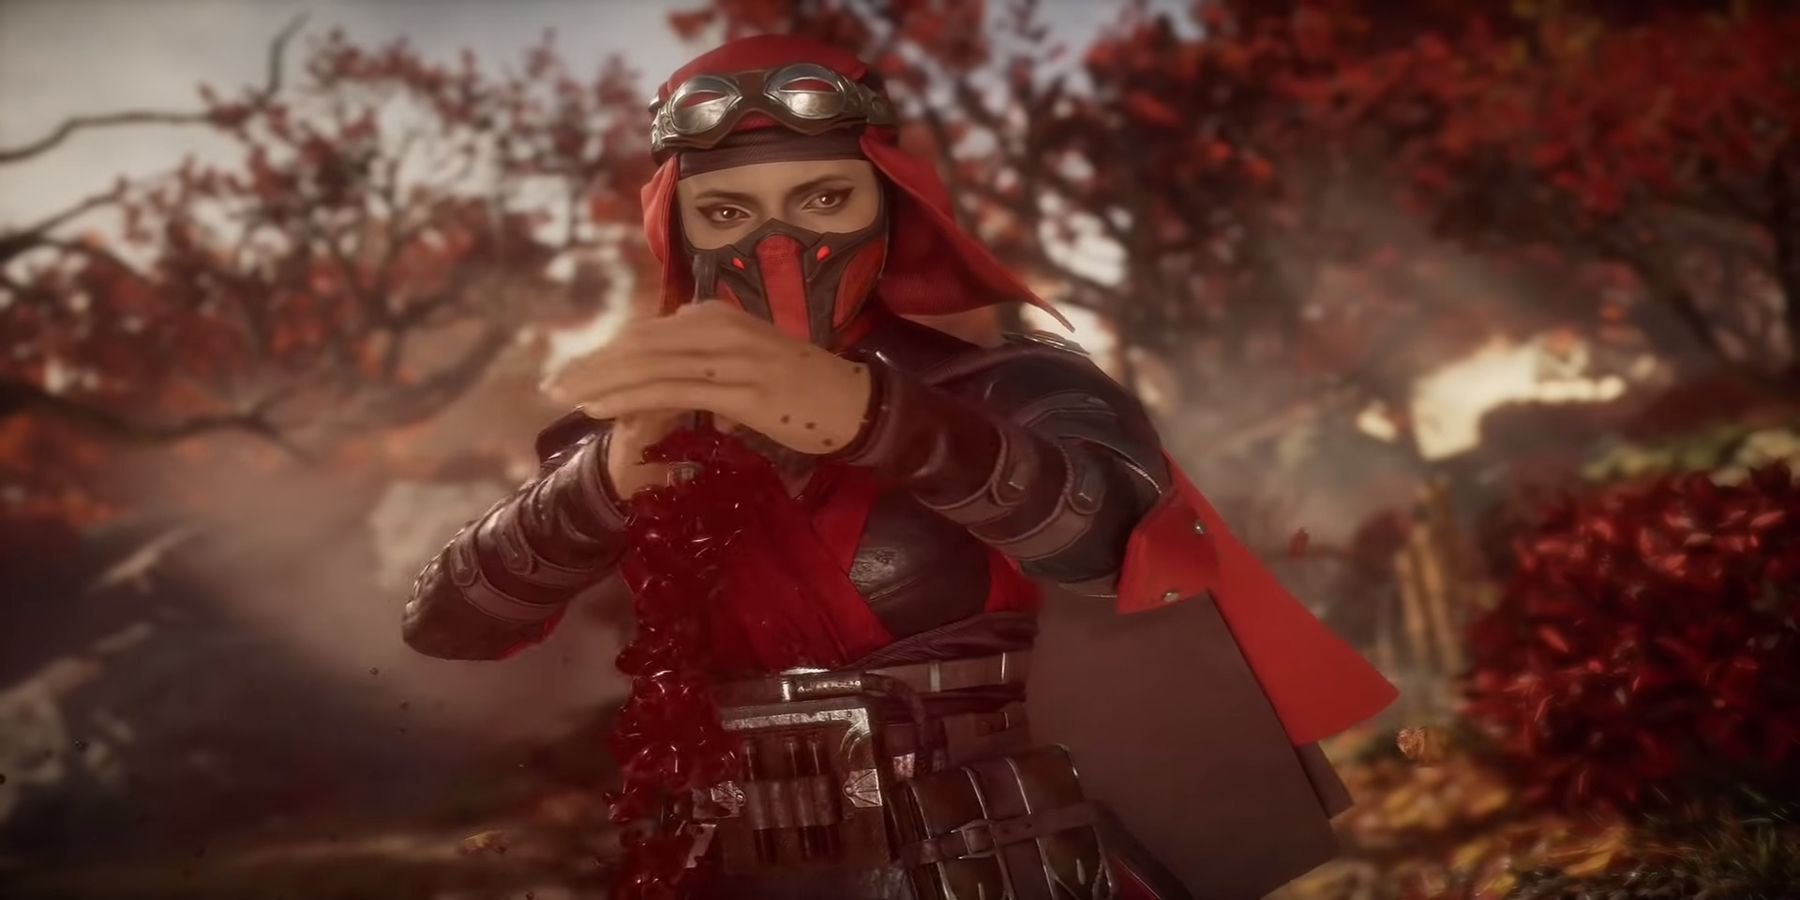 Skarlet from Mortal Kombat 11 cuts her hand with a bloody knife in intro scene.